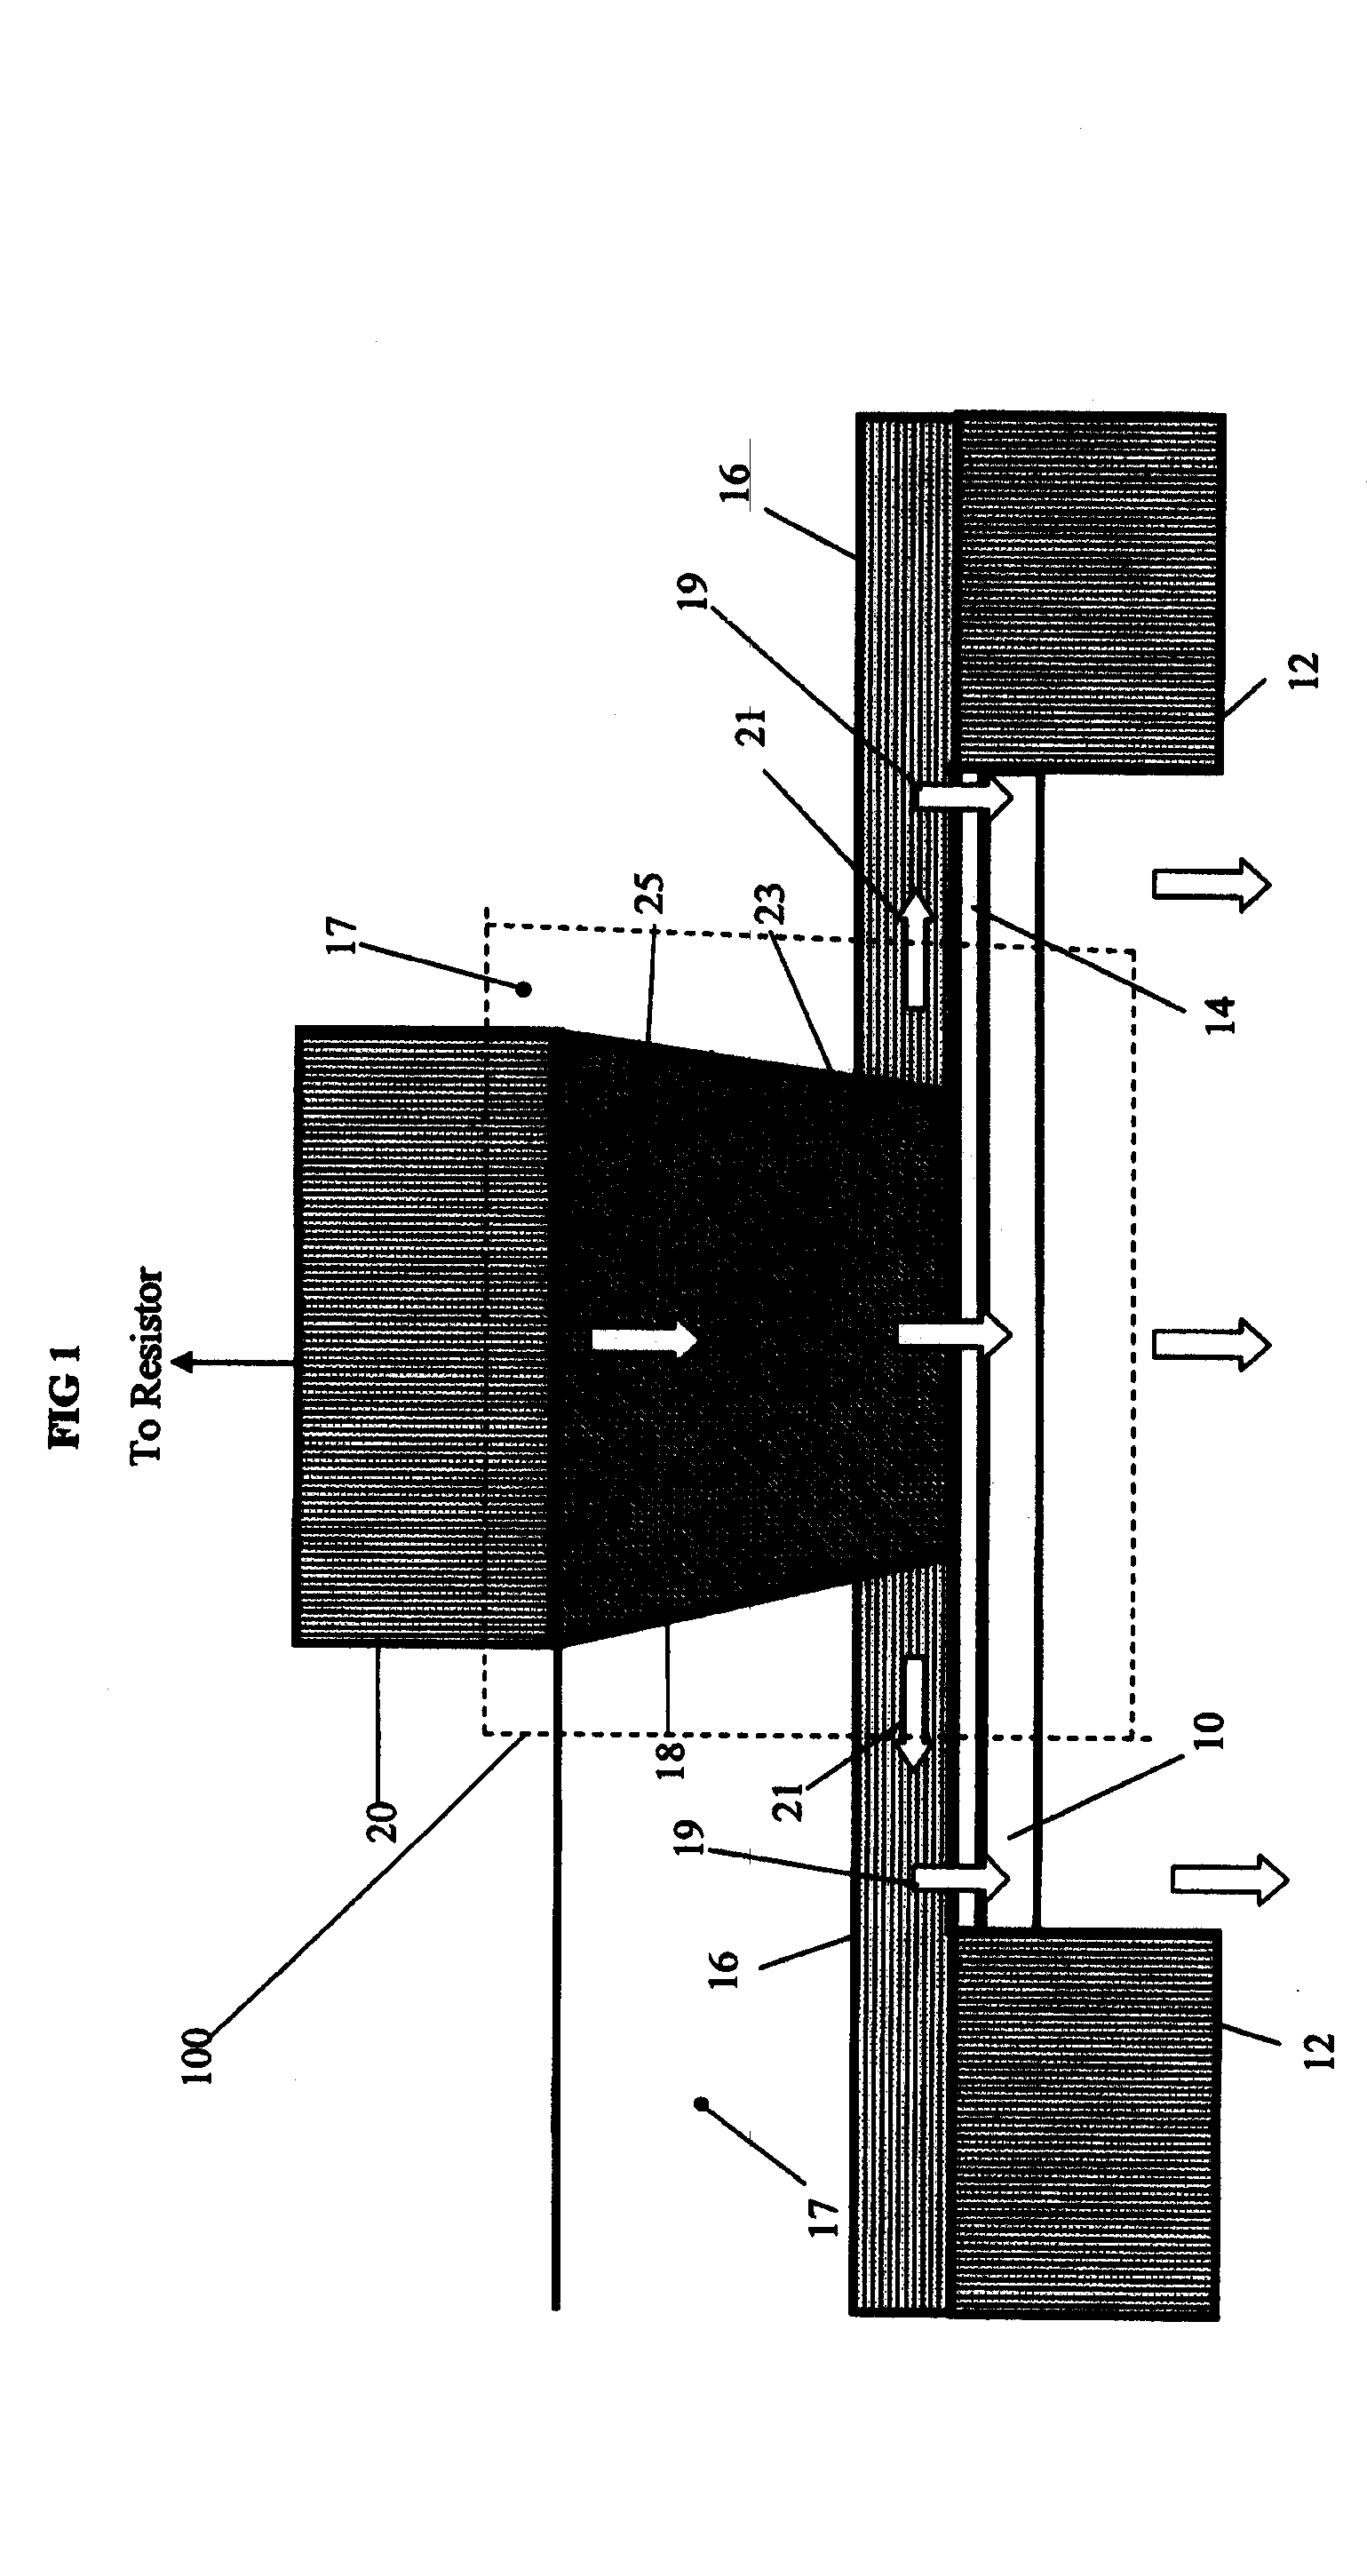 Heat sink for integrated circuit devices